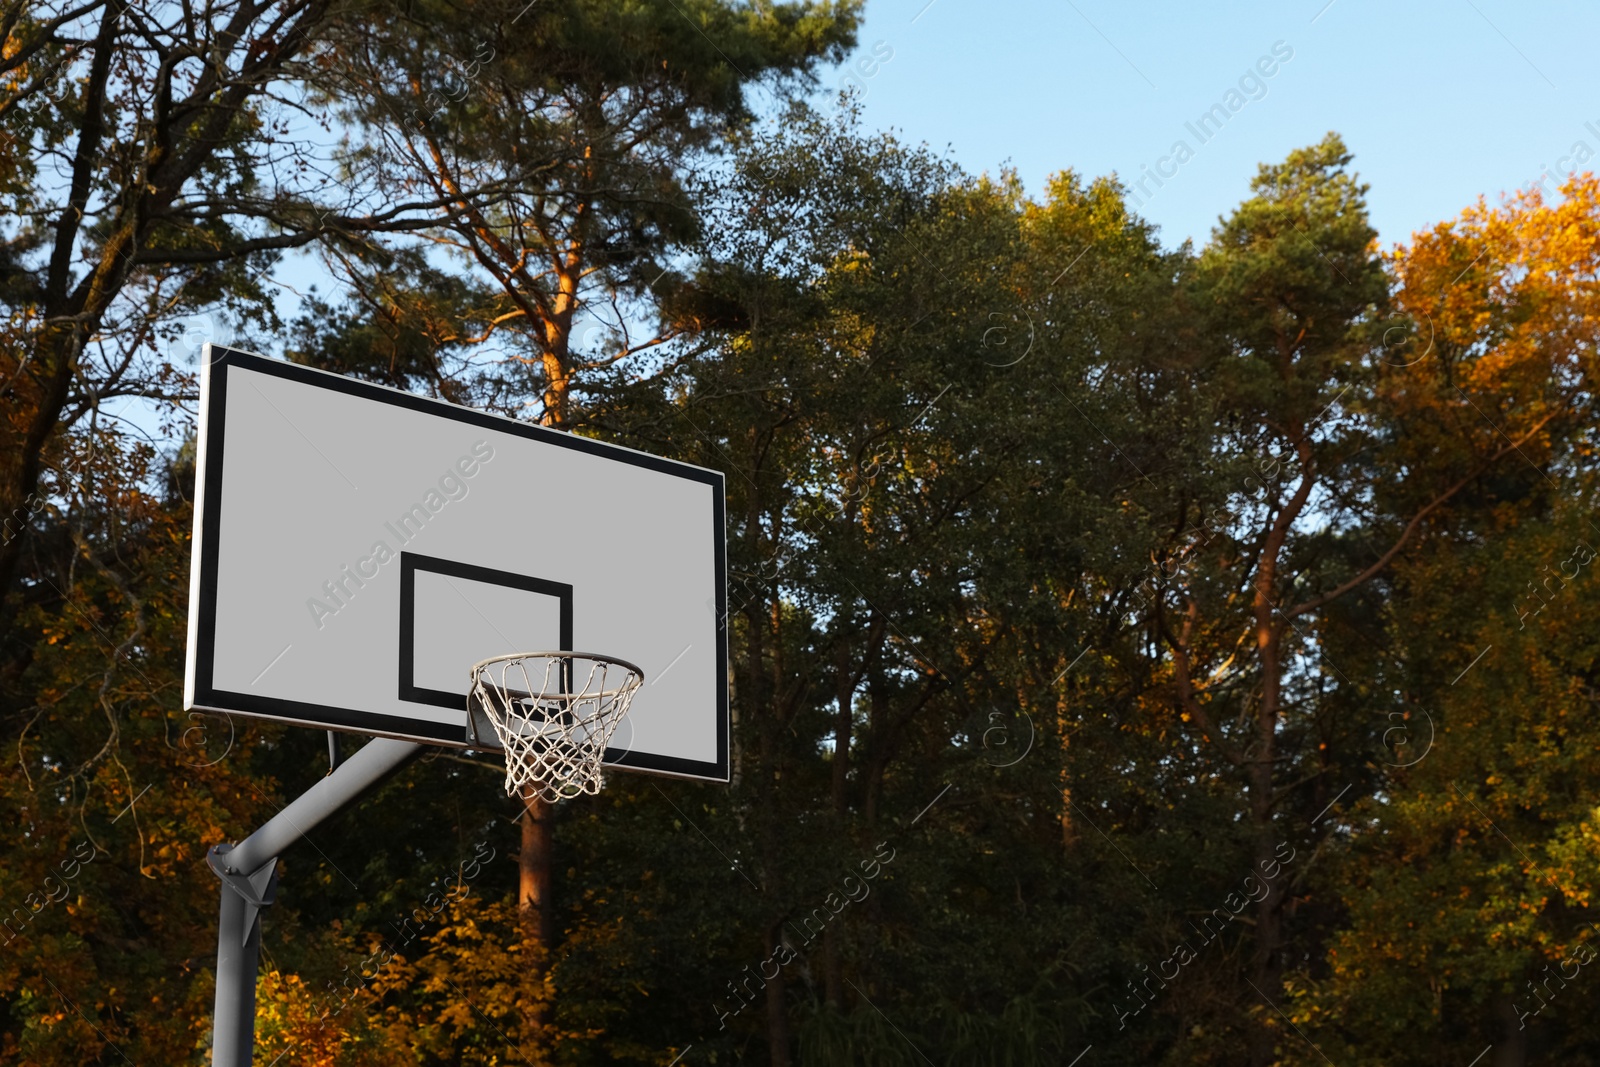 Photo of Basketball backboard with net against trees outdoors